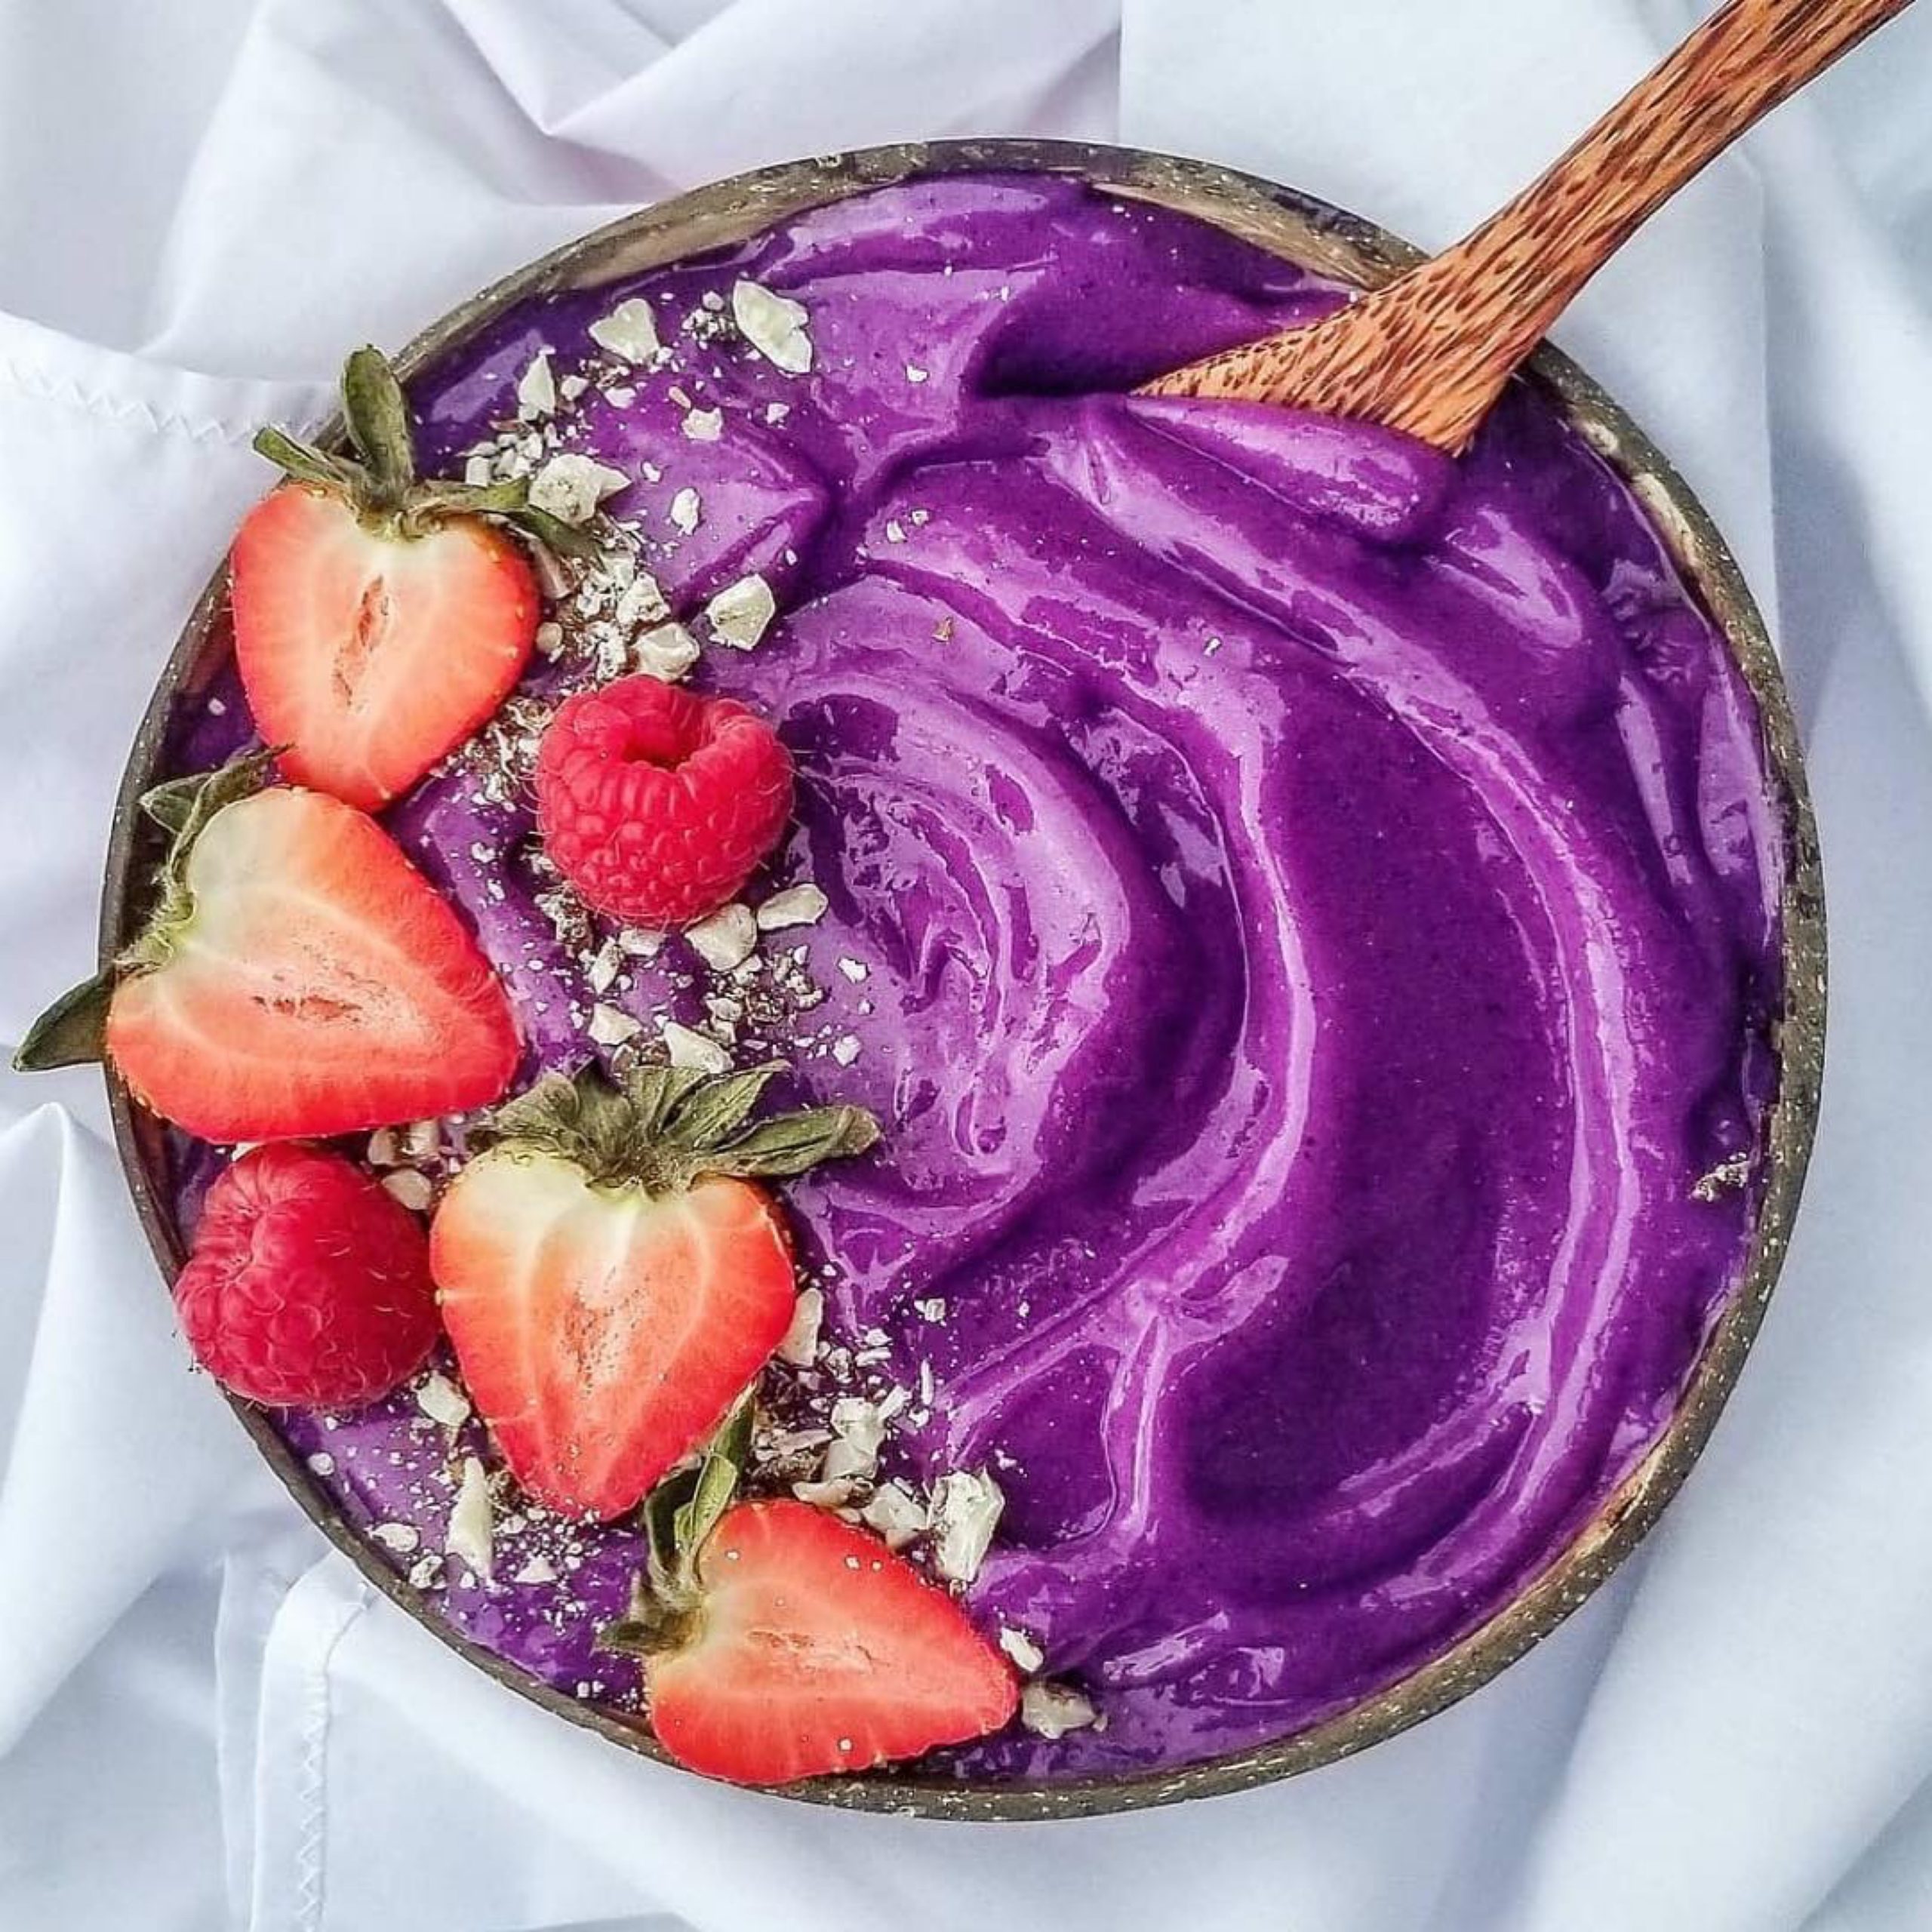 The most delicious smoothie bowls that make you look amazing - Slaylebrity